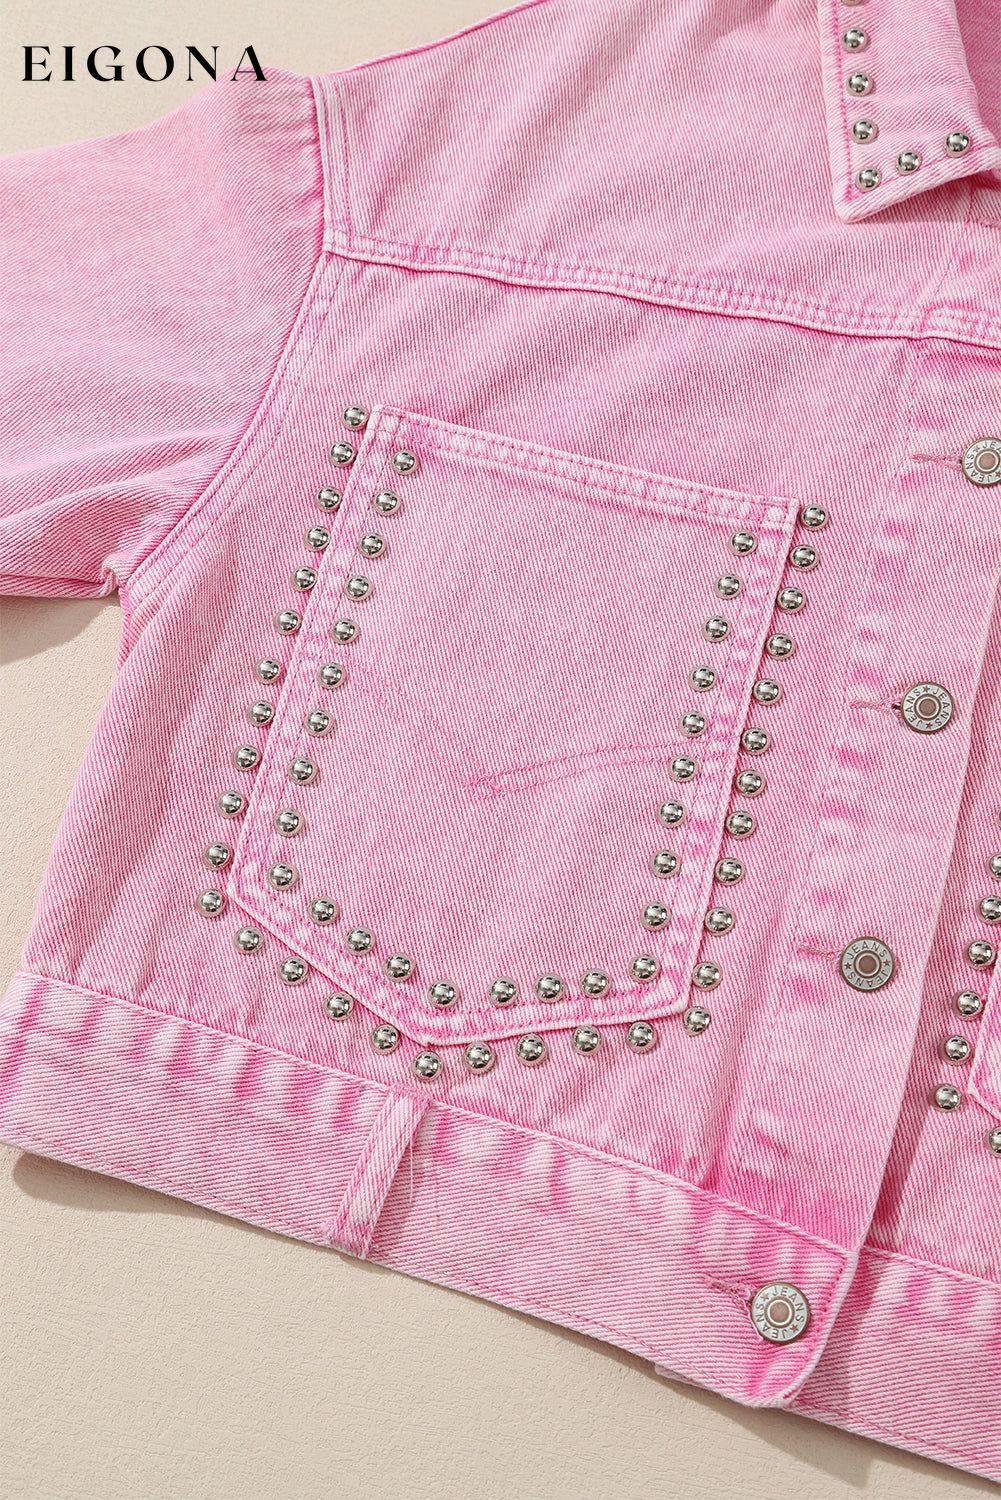 Pink Rivet Studded Pocketed Pink Denim Jacket All In Stock Category Shacket clothes Color Pink Craft Rhinestone Day Valentine's Day Fabric Denim Jackets & Coats Occasion Daily Print Solid Color Season Winter